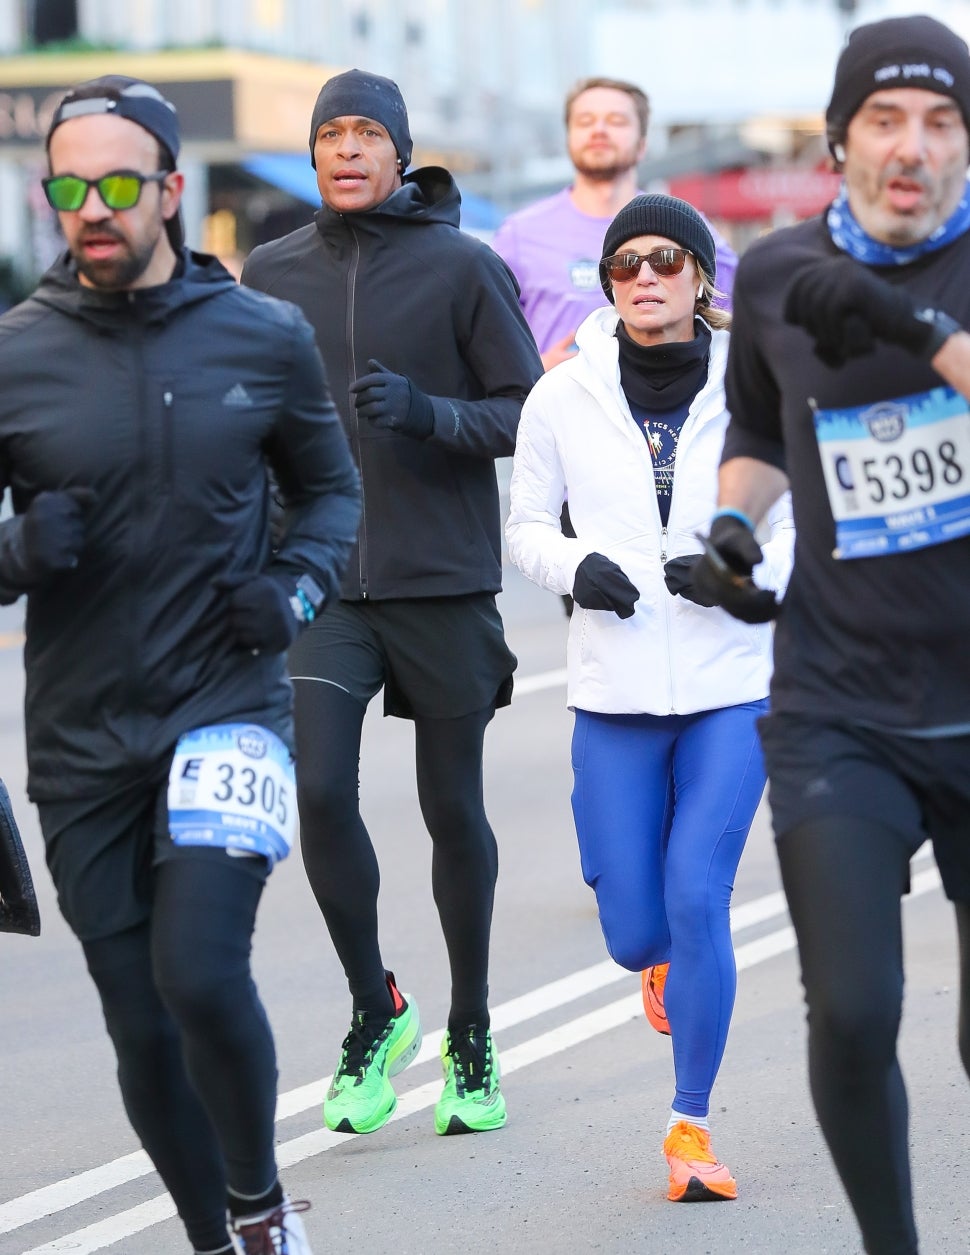 Amy Robach And T. J. Holmes Seen Running The NYC Marathon.